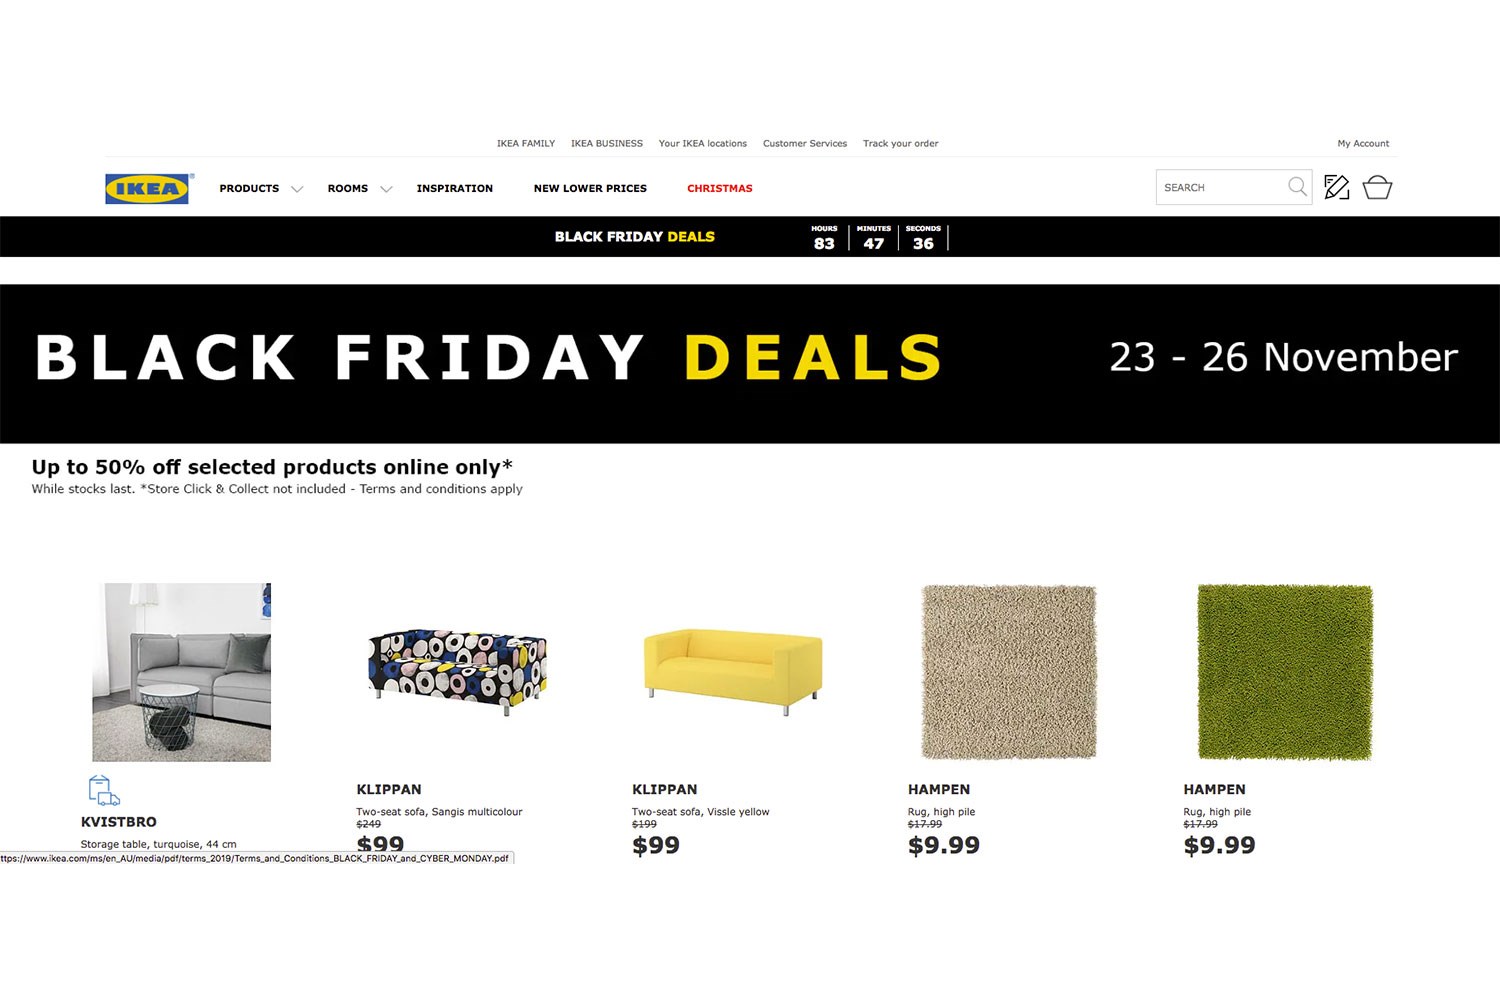 IKEA has launched a Black Friday halfprice sale with prices reduced by